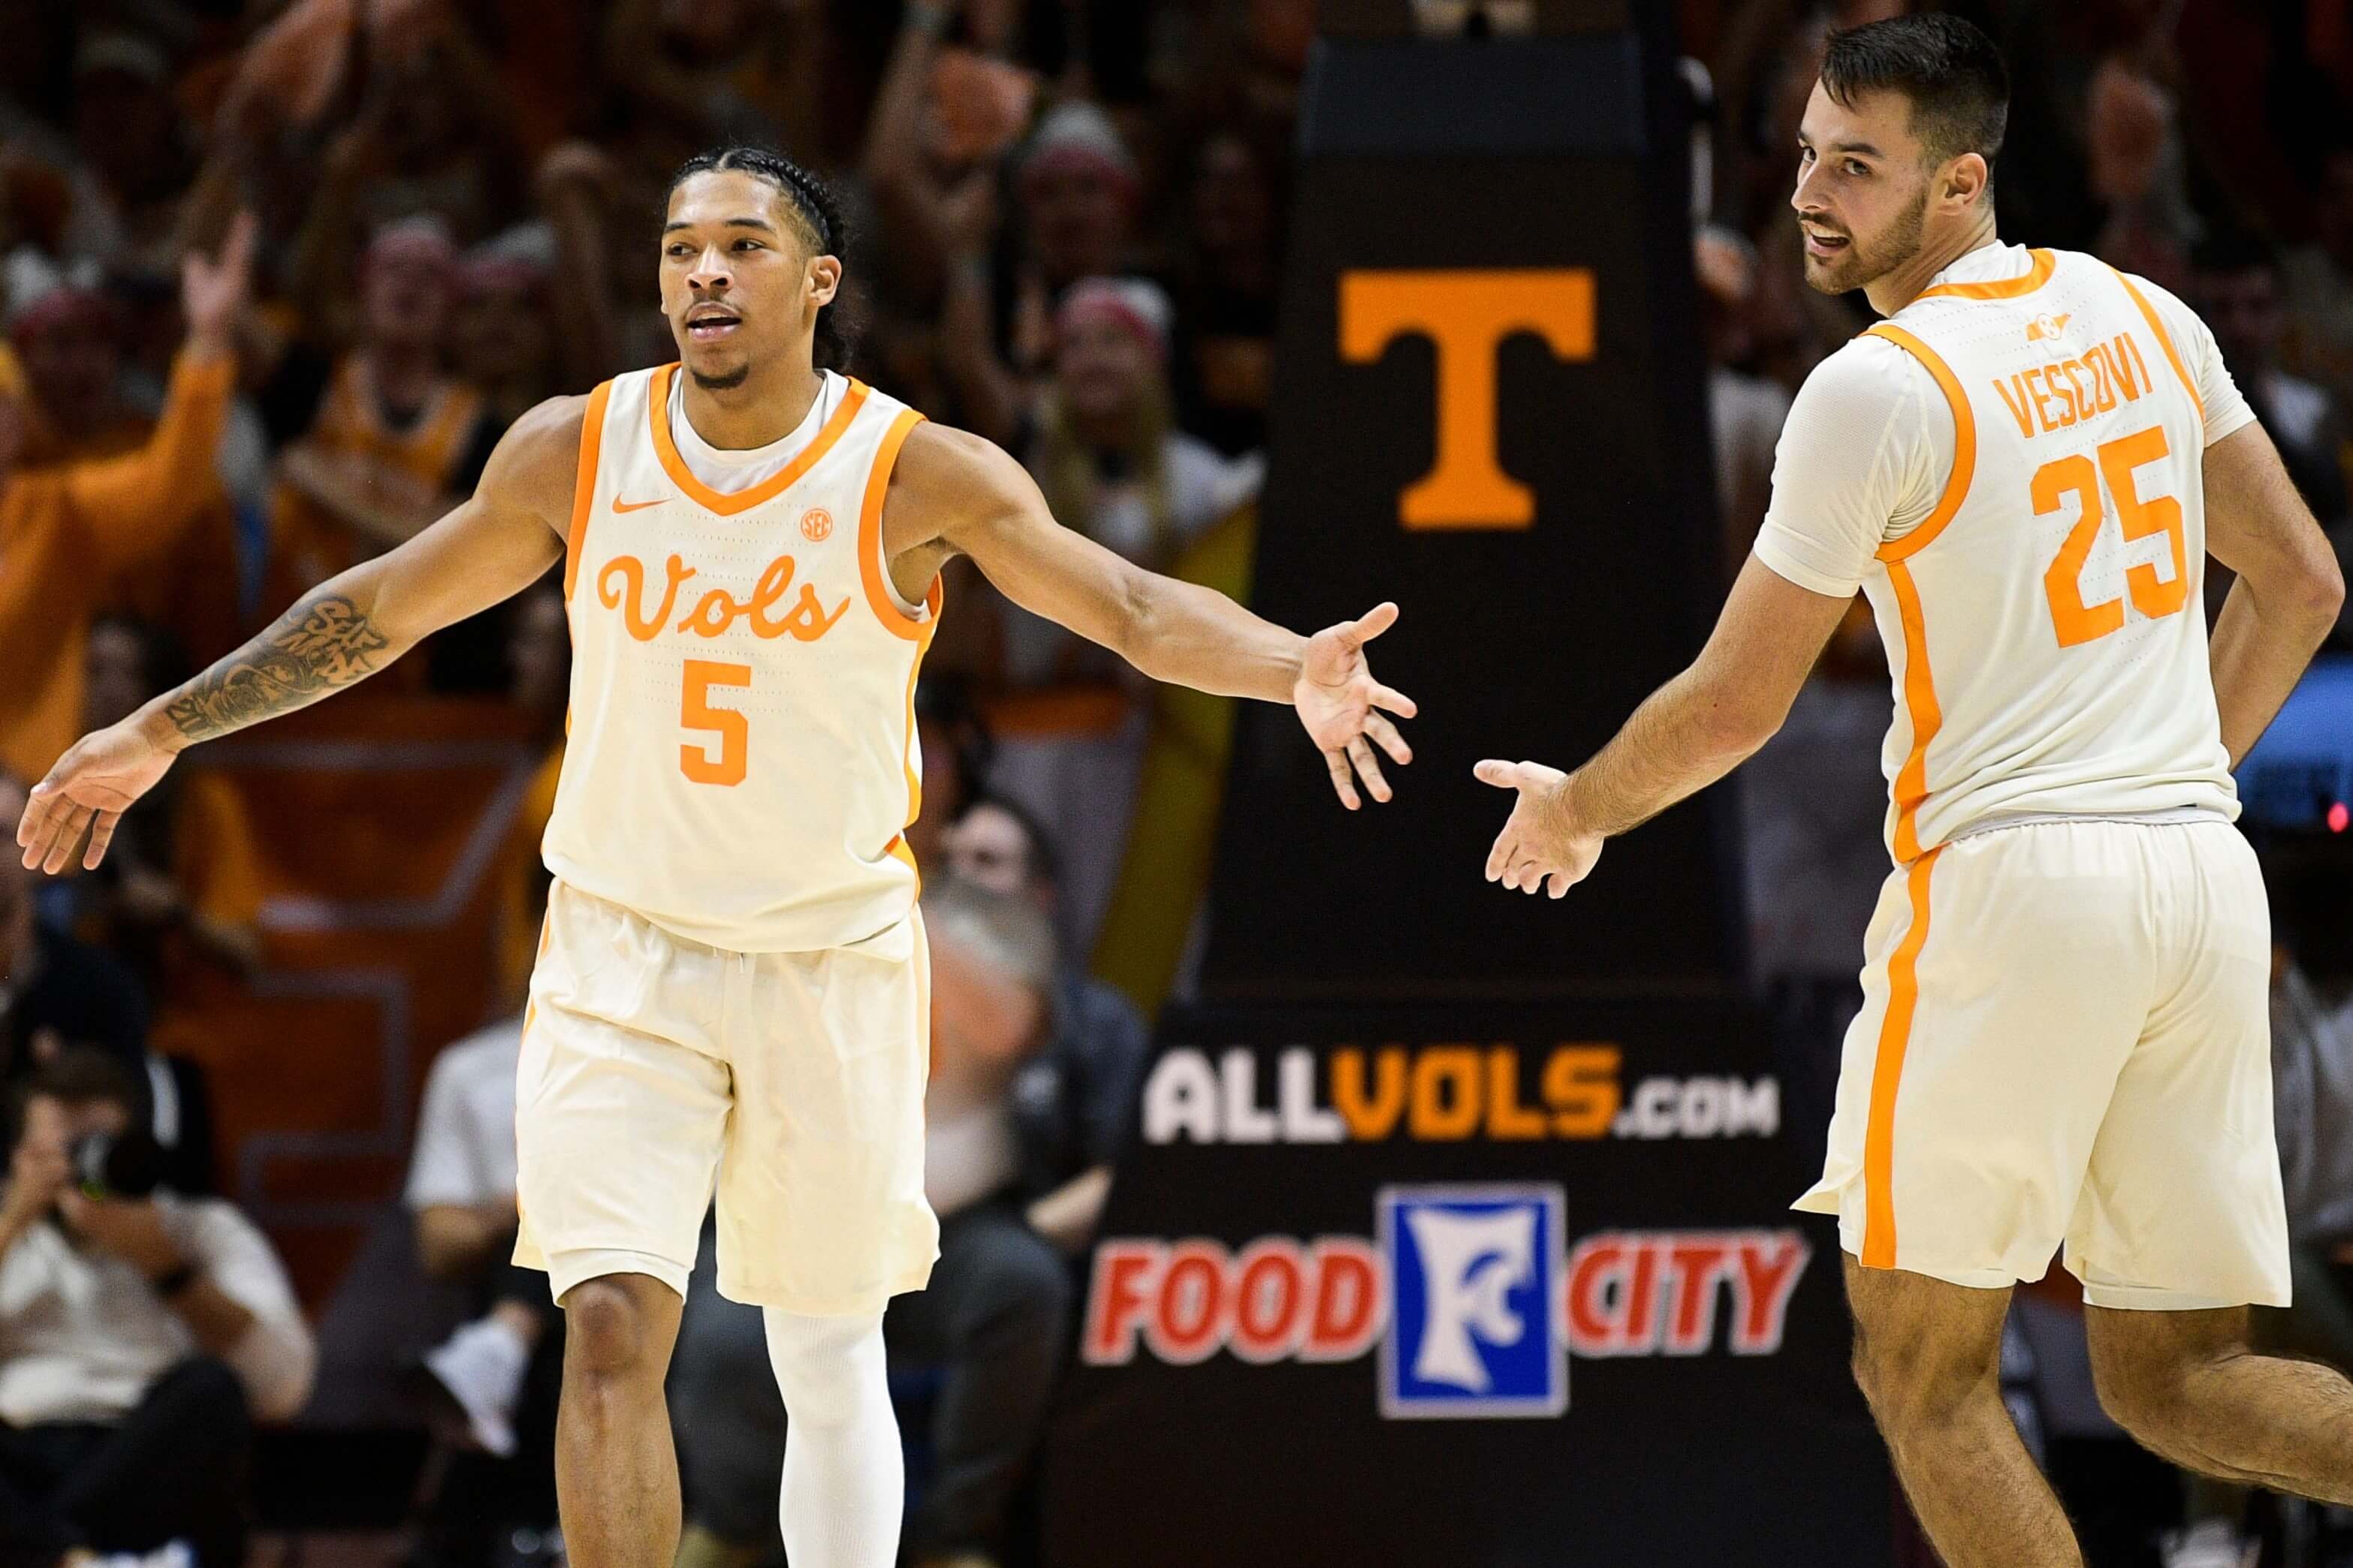 Tennessee vs Vanderbilt Odds, Picks and Predictions: Vols Defense Leads to Road Victory